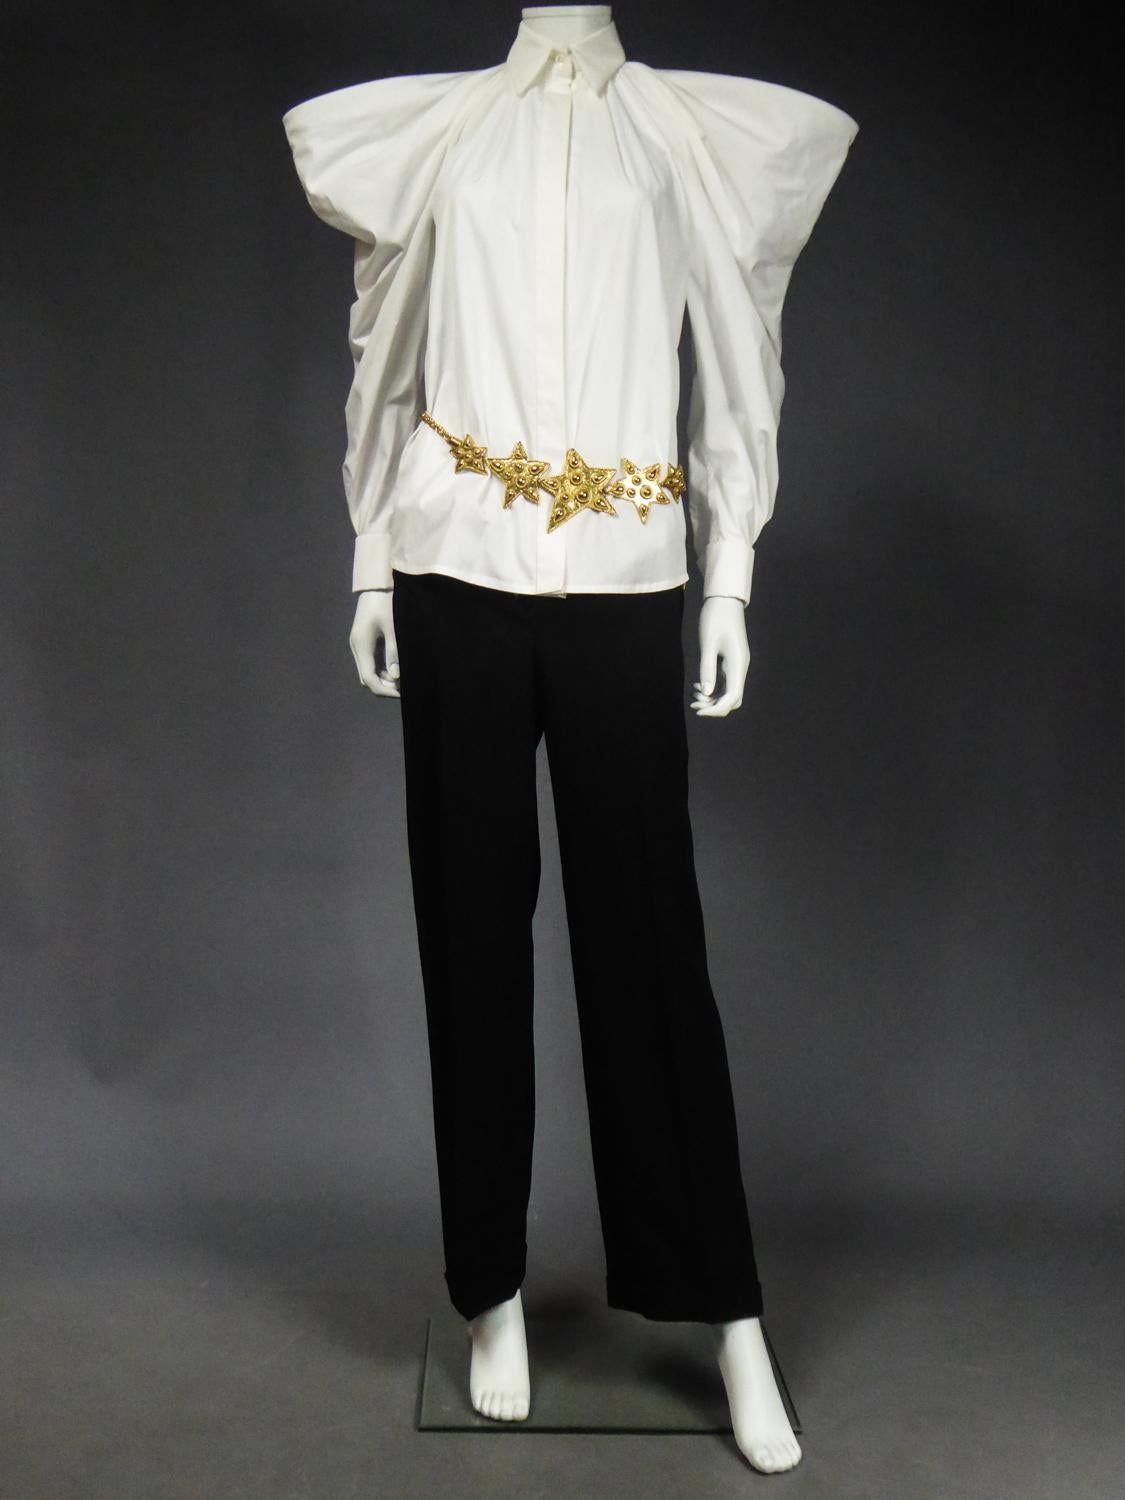 18th century shirt with puffy sleeves